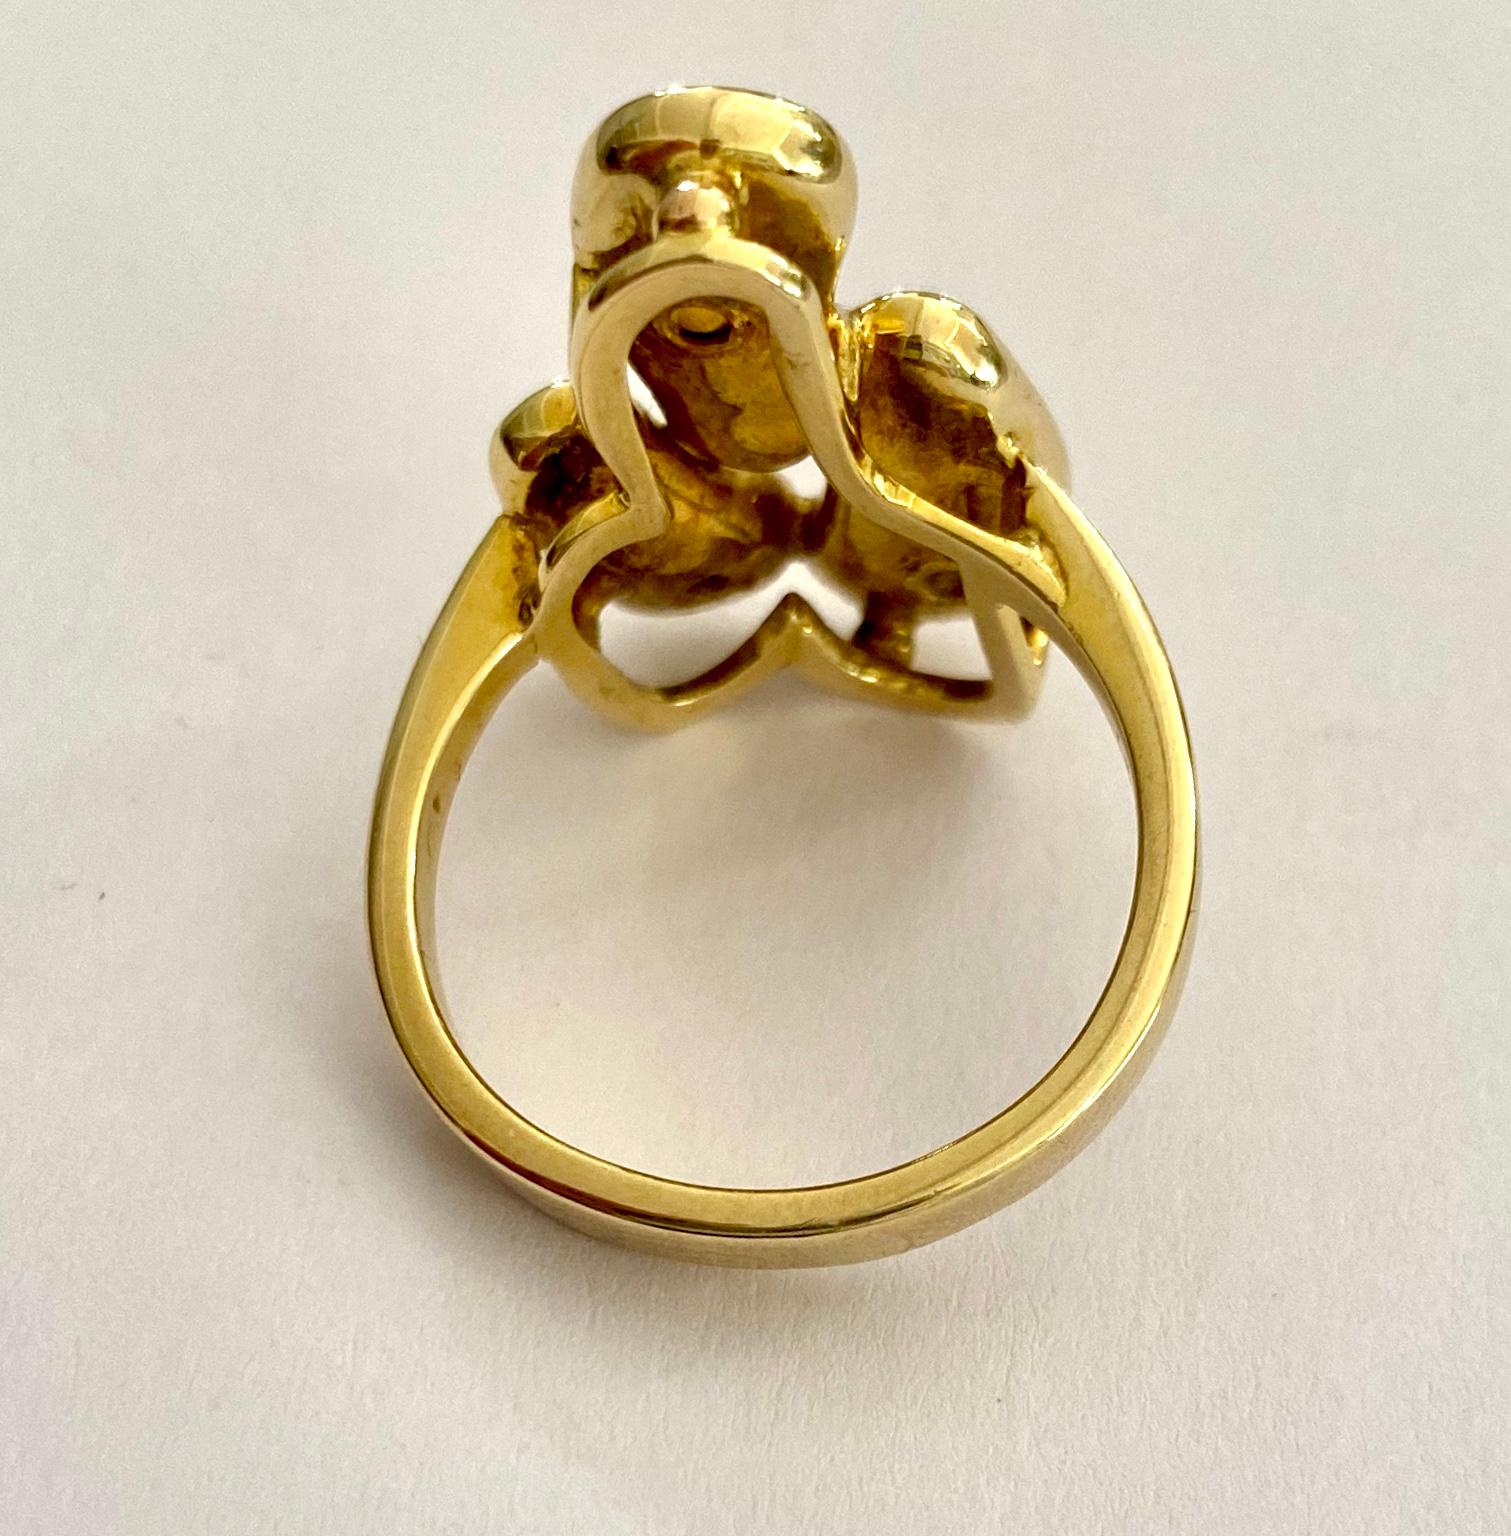 Modernist One '1' 14 Karat Yellow Gold Ring, 2 Diamonds and 1 Cultured Pearl, Germany 1960